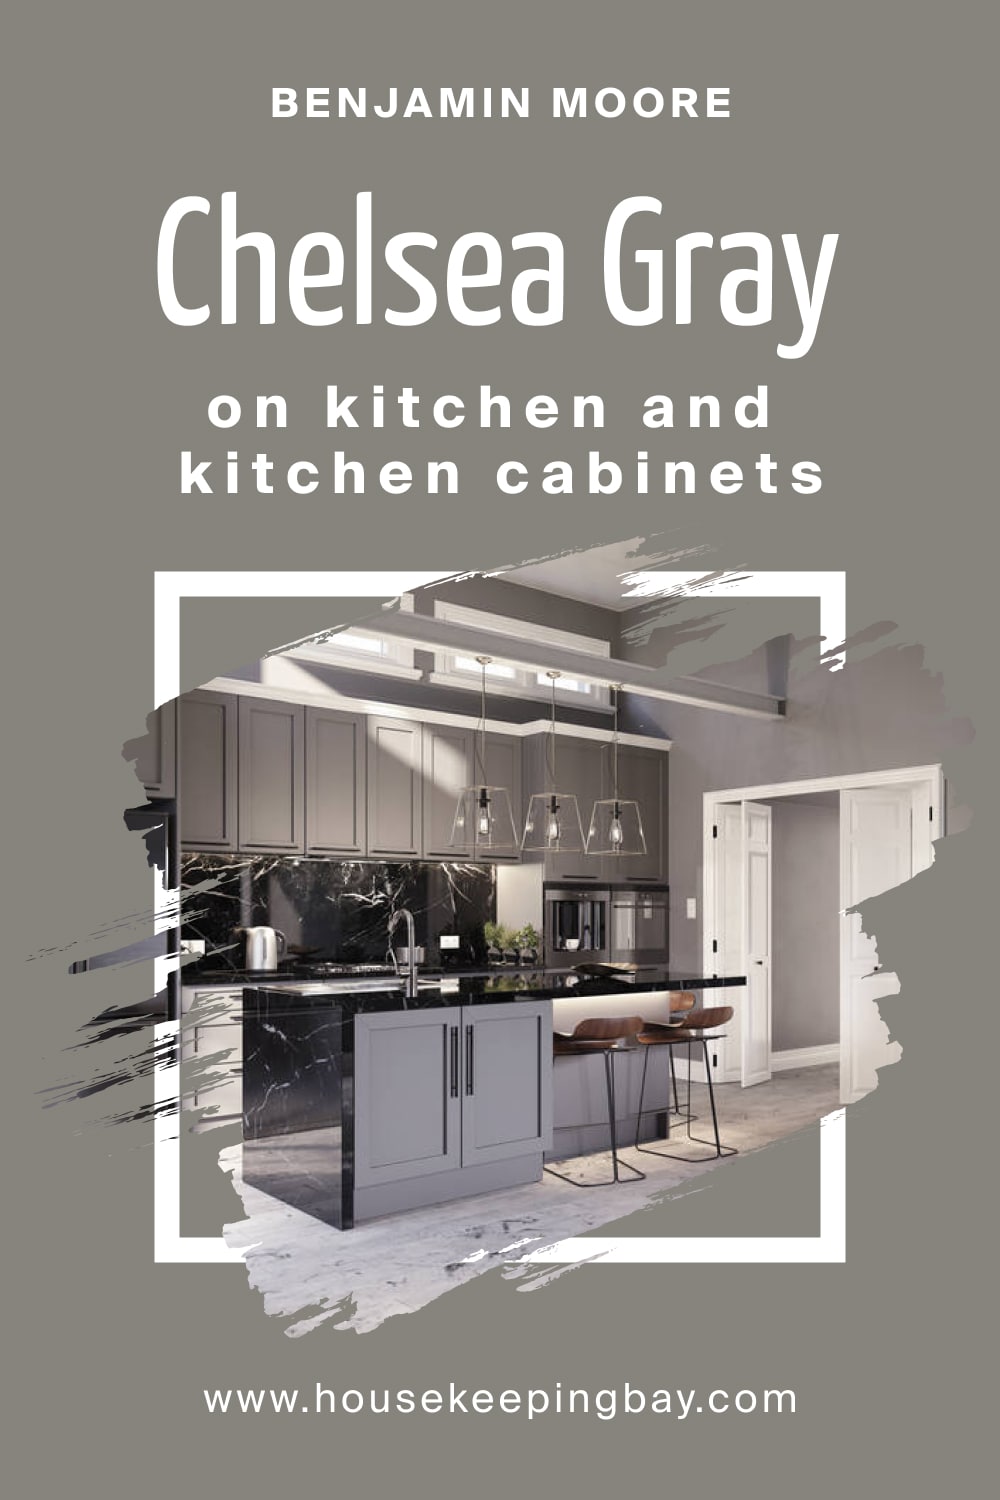 Benjamin Moore. Chelsea Gray HC 168 On Kitchen and Kitchen Cabinets